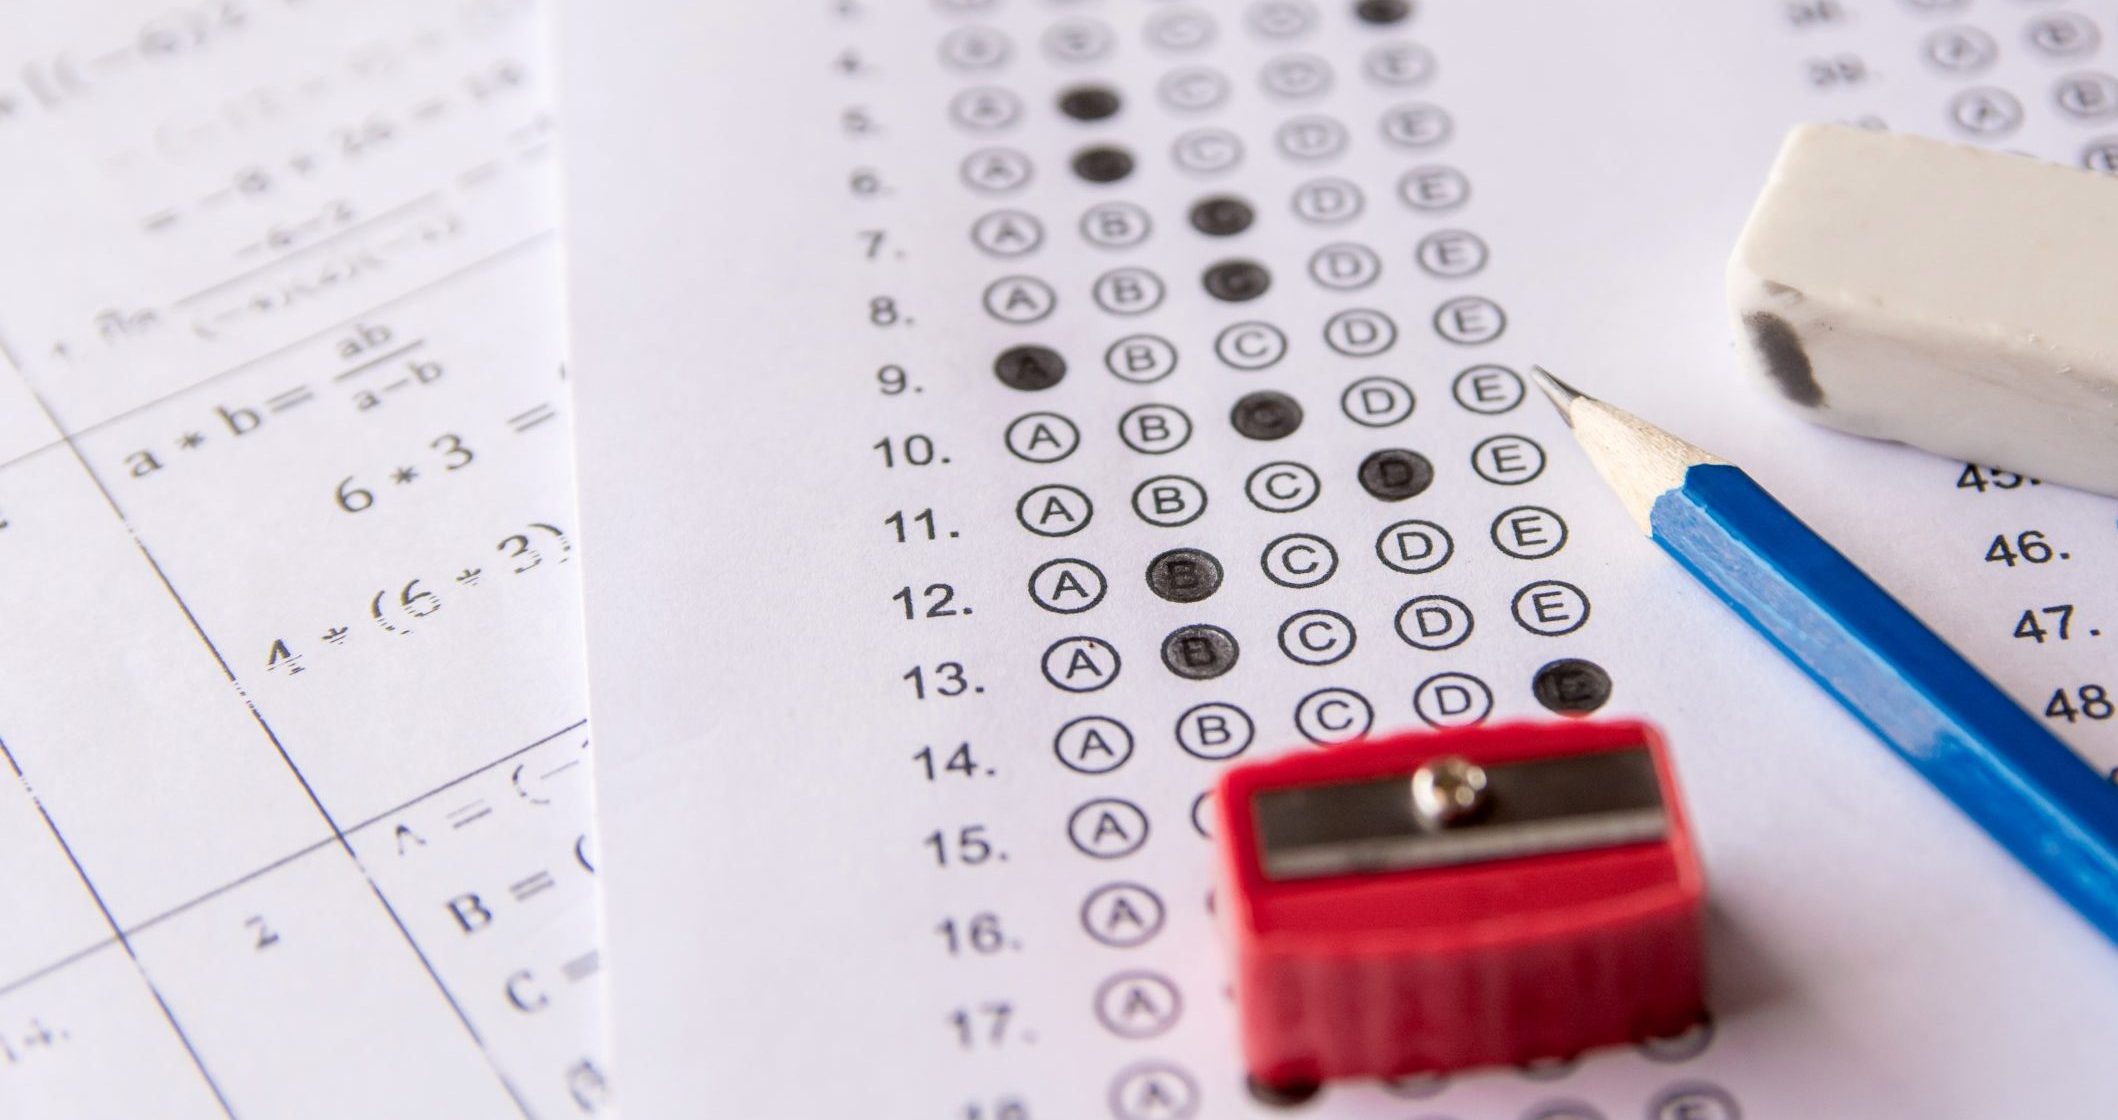 Pencil, Sharpener and eraser on answer sheets or Standardized test form with answers bubbled. multiple choice answer sheet